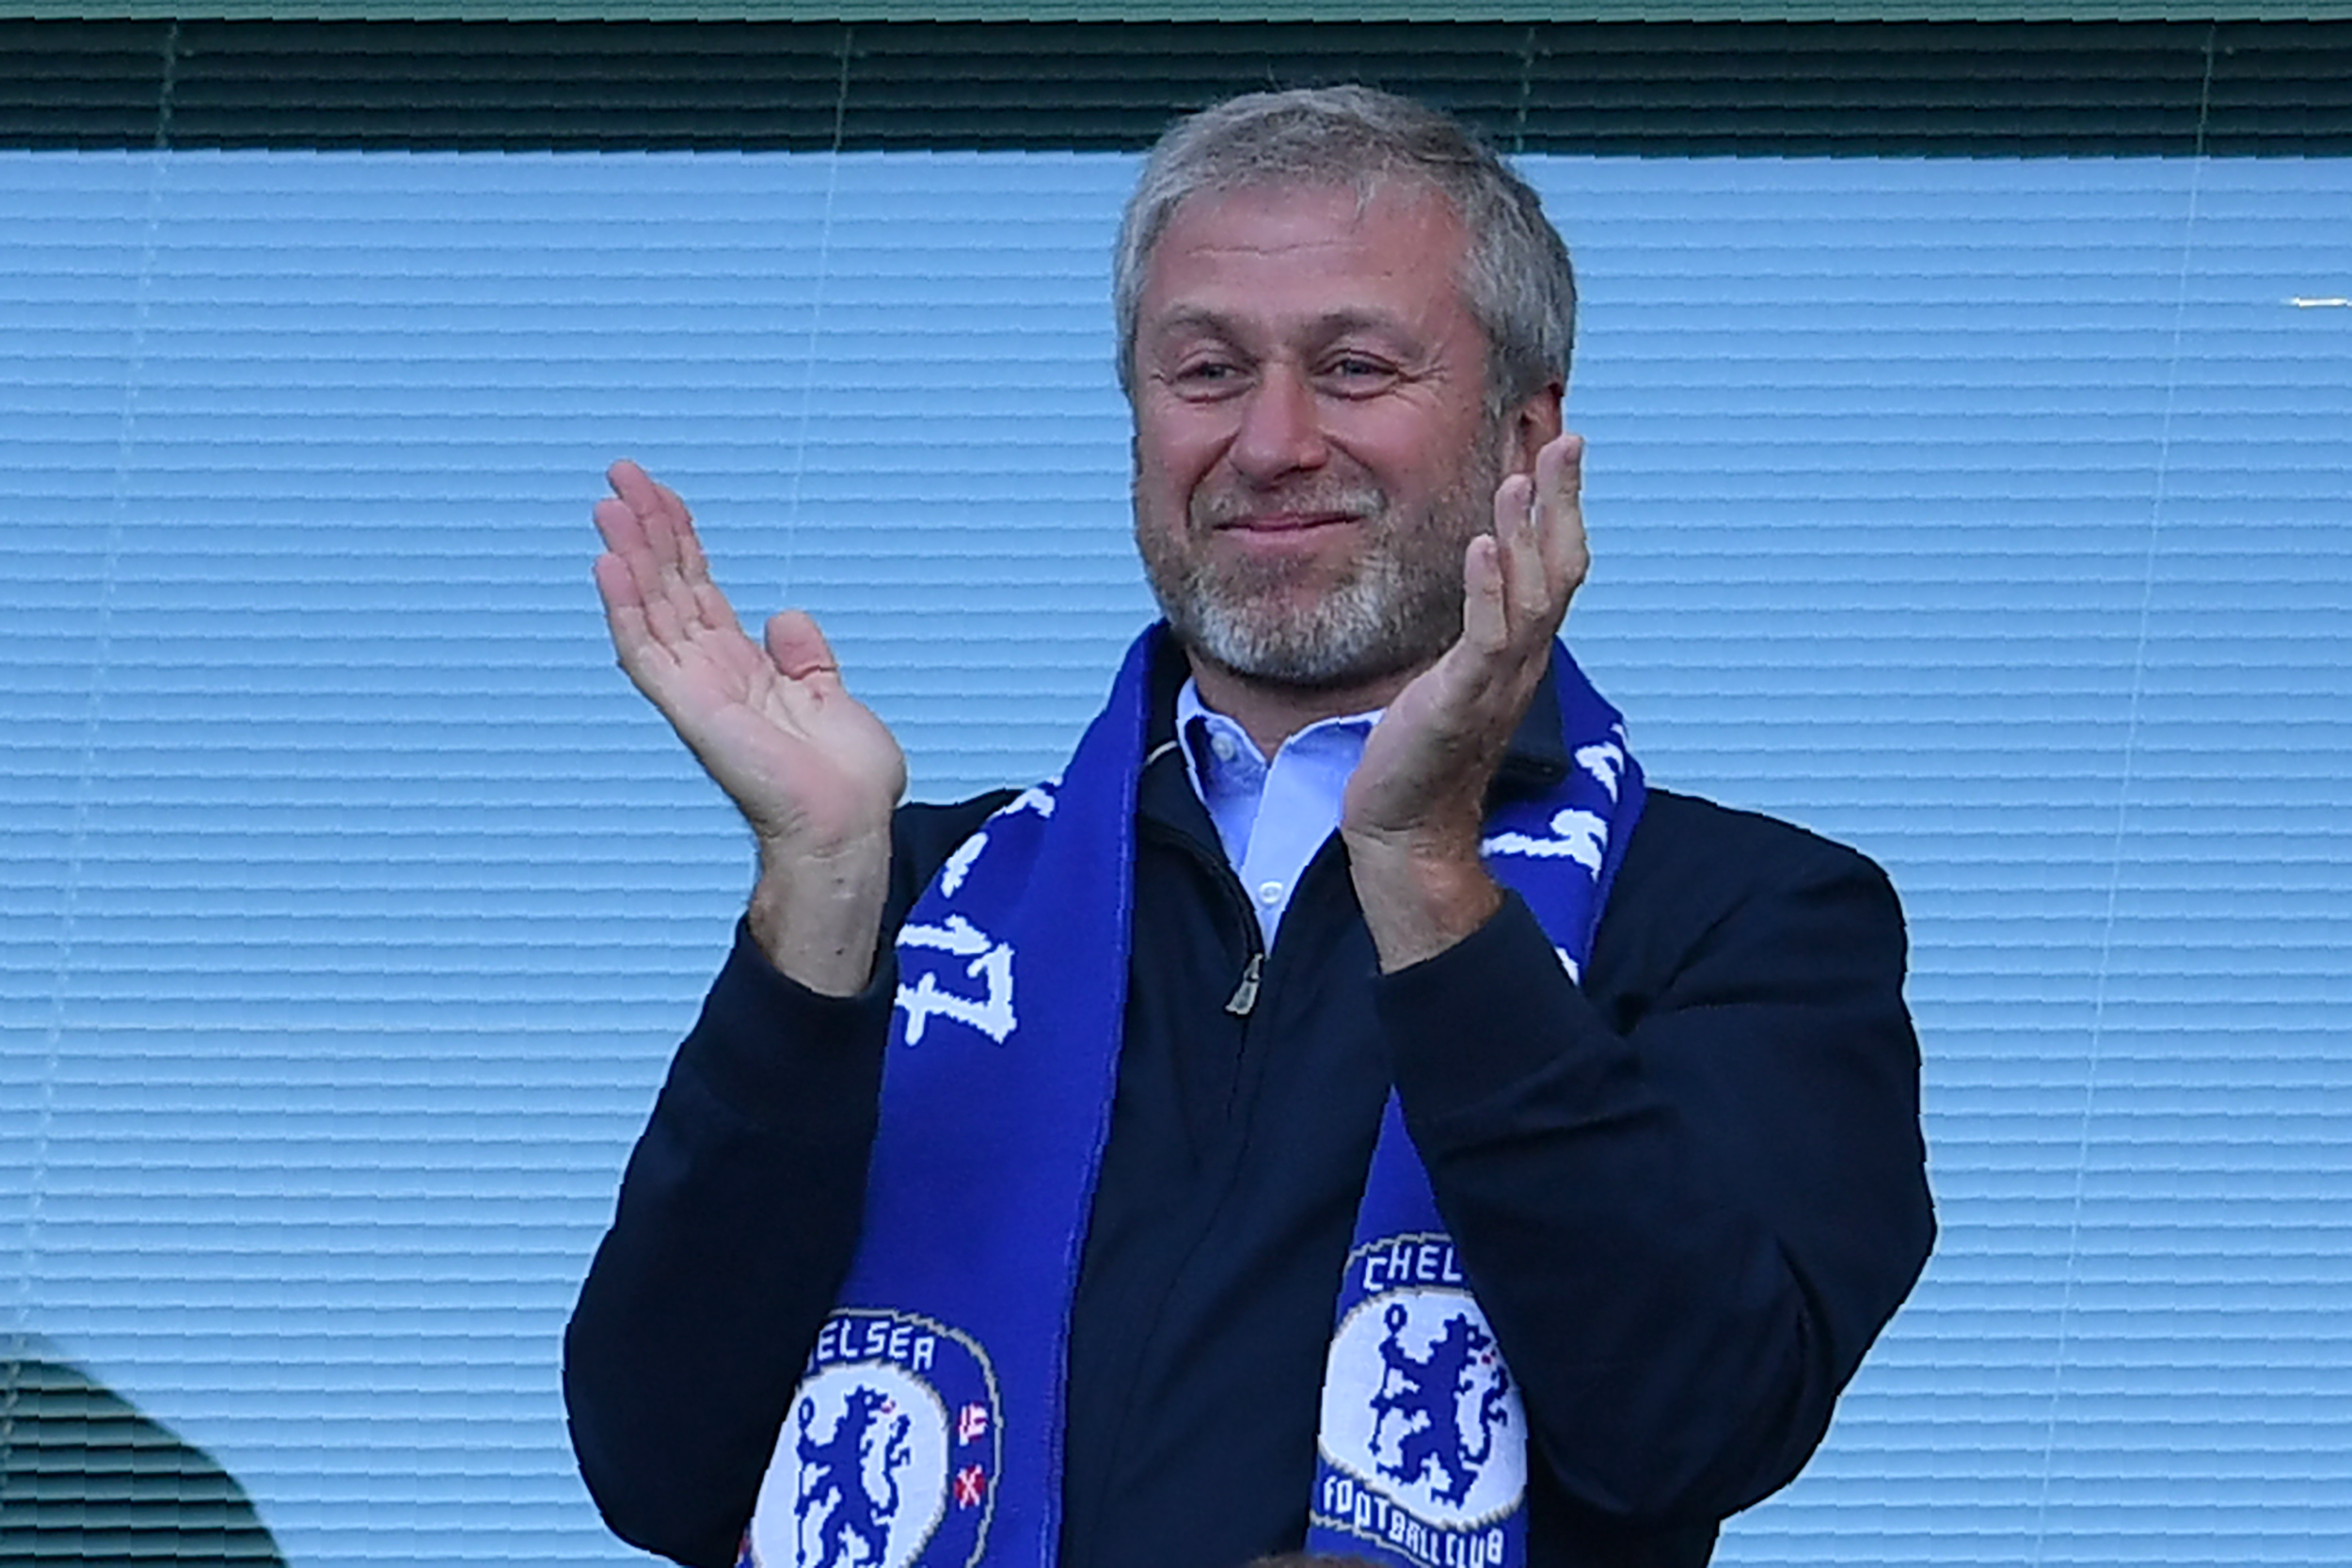 Chelsea have come under Premier League scrutiny for breaking financial rules.